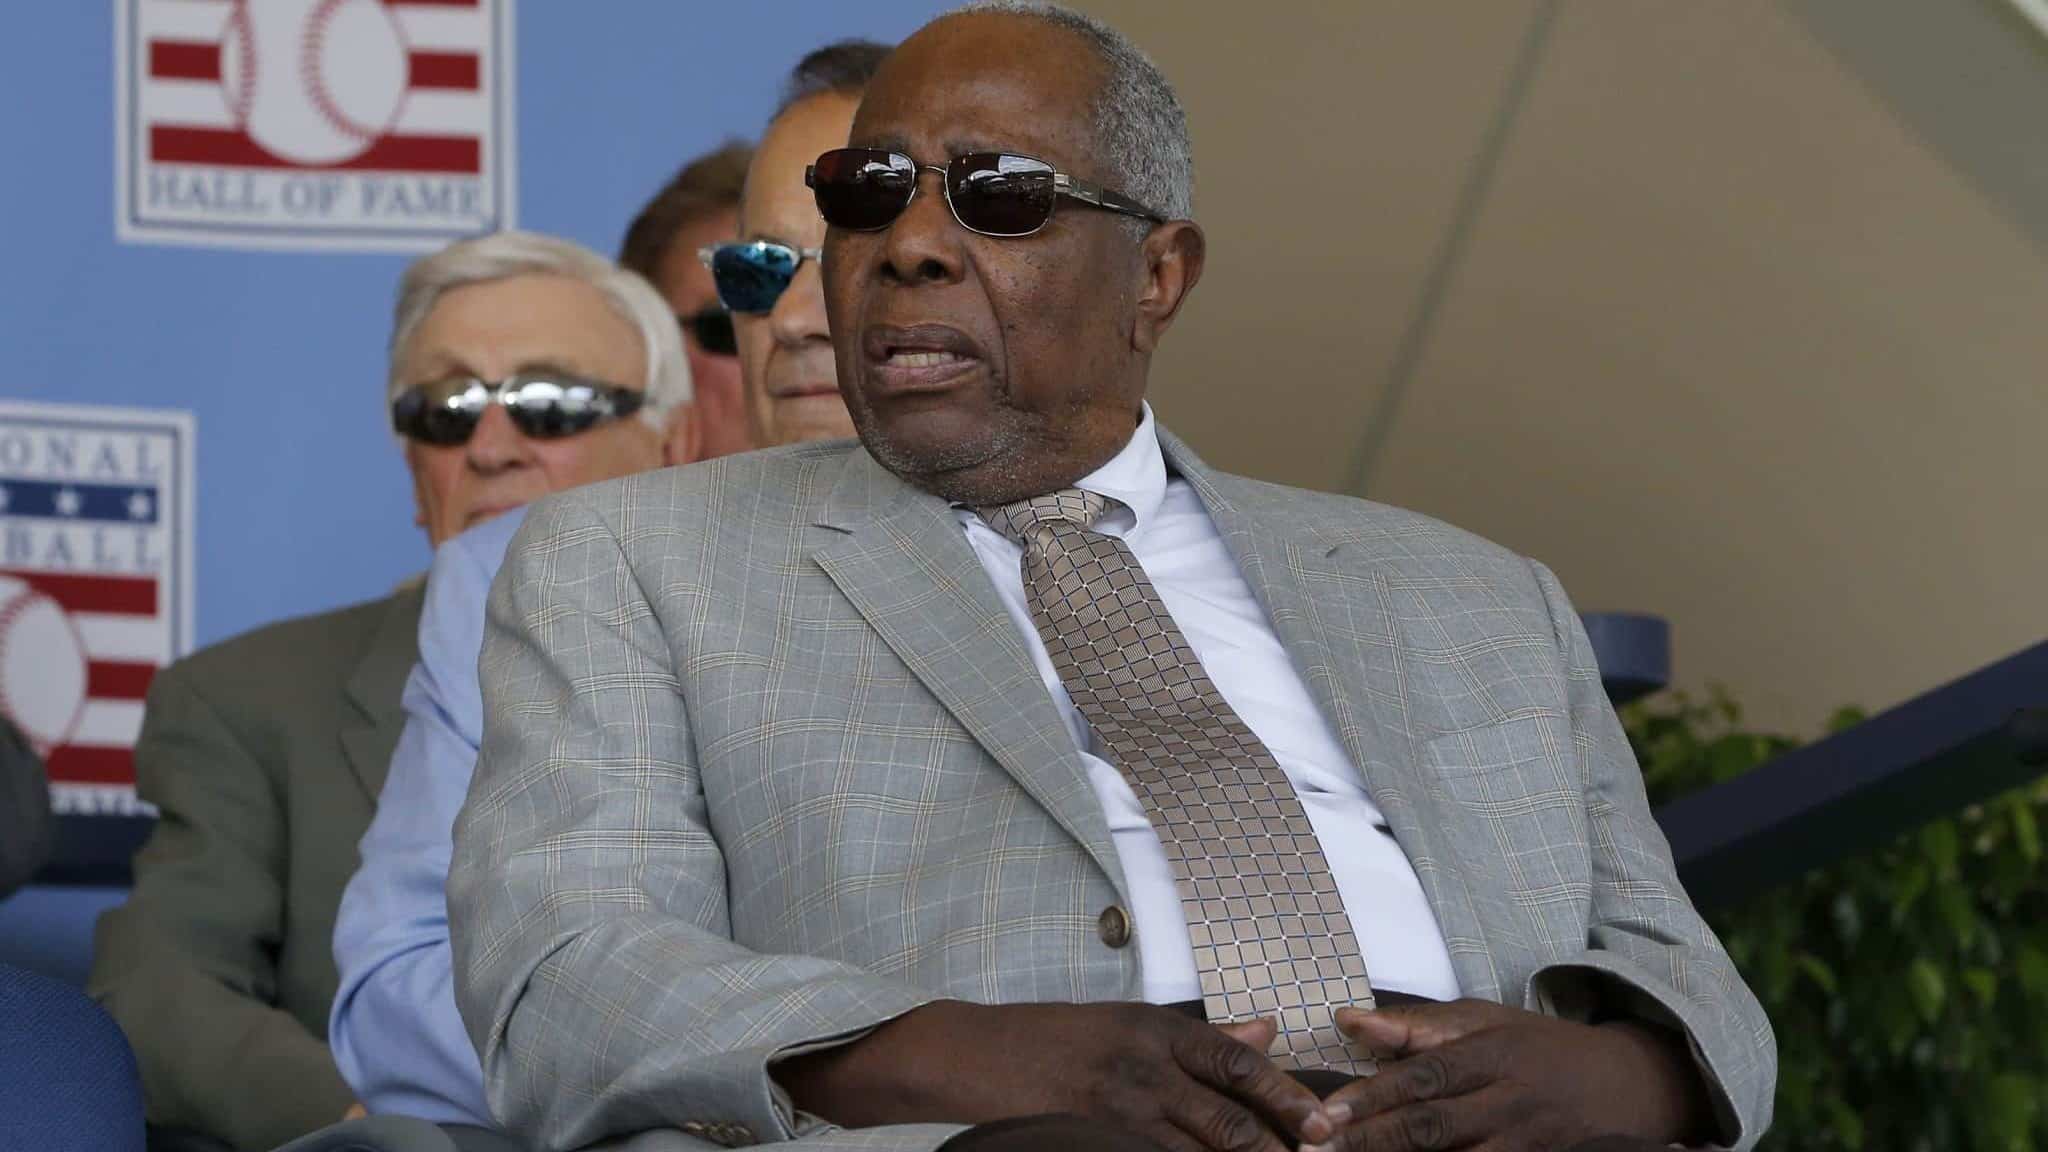 COOPERSTOWN, NEW YORK - JULY 21: Baseball icon Hank Aaron looks on during the Baseball Hall of Fame induction ceremony at Clark Sports Center on July 21, 2019 in Cooperstown, New York.